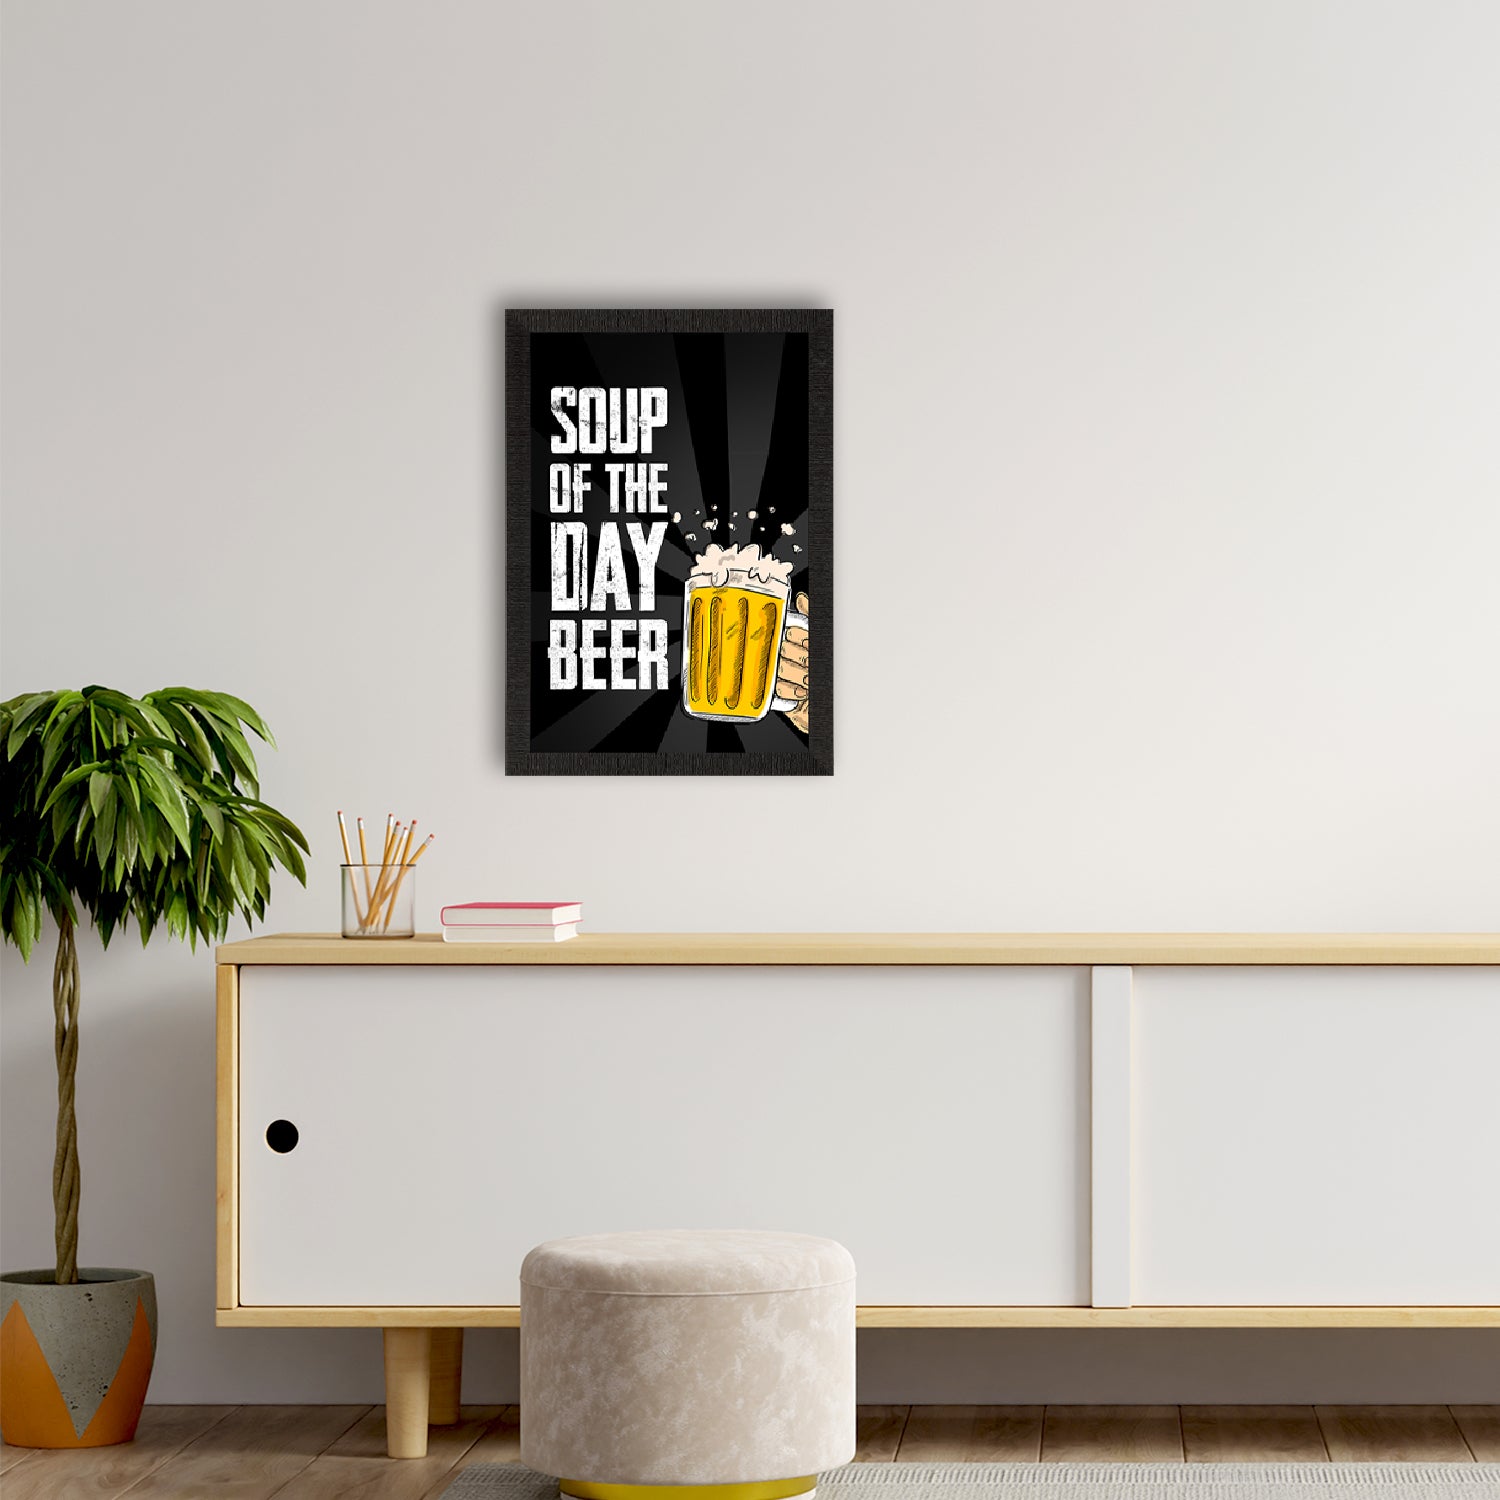 "Soup of the Day - Beer" Quirky Quote Satin Matt Texture UV Art Painting 2